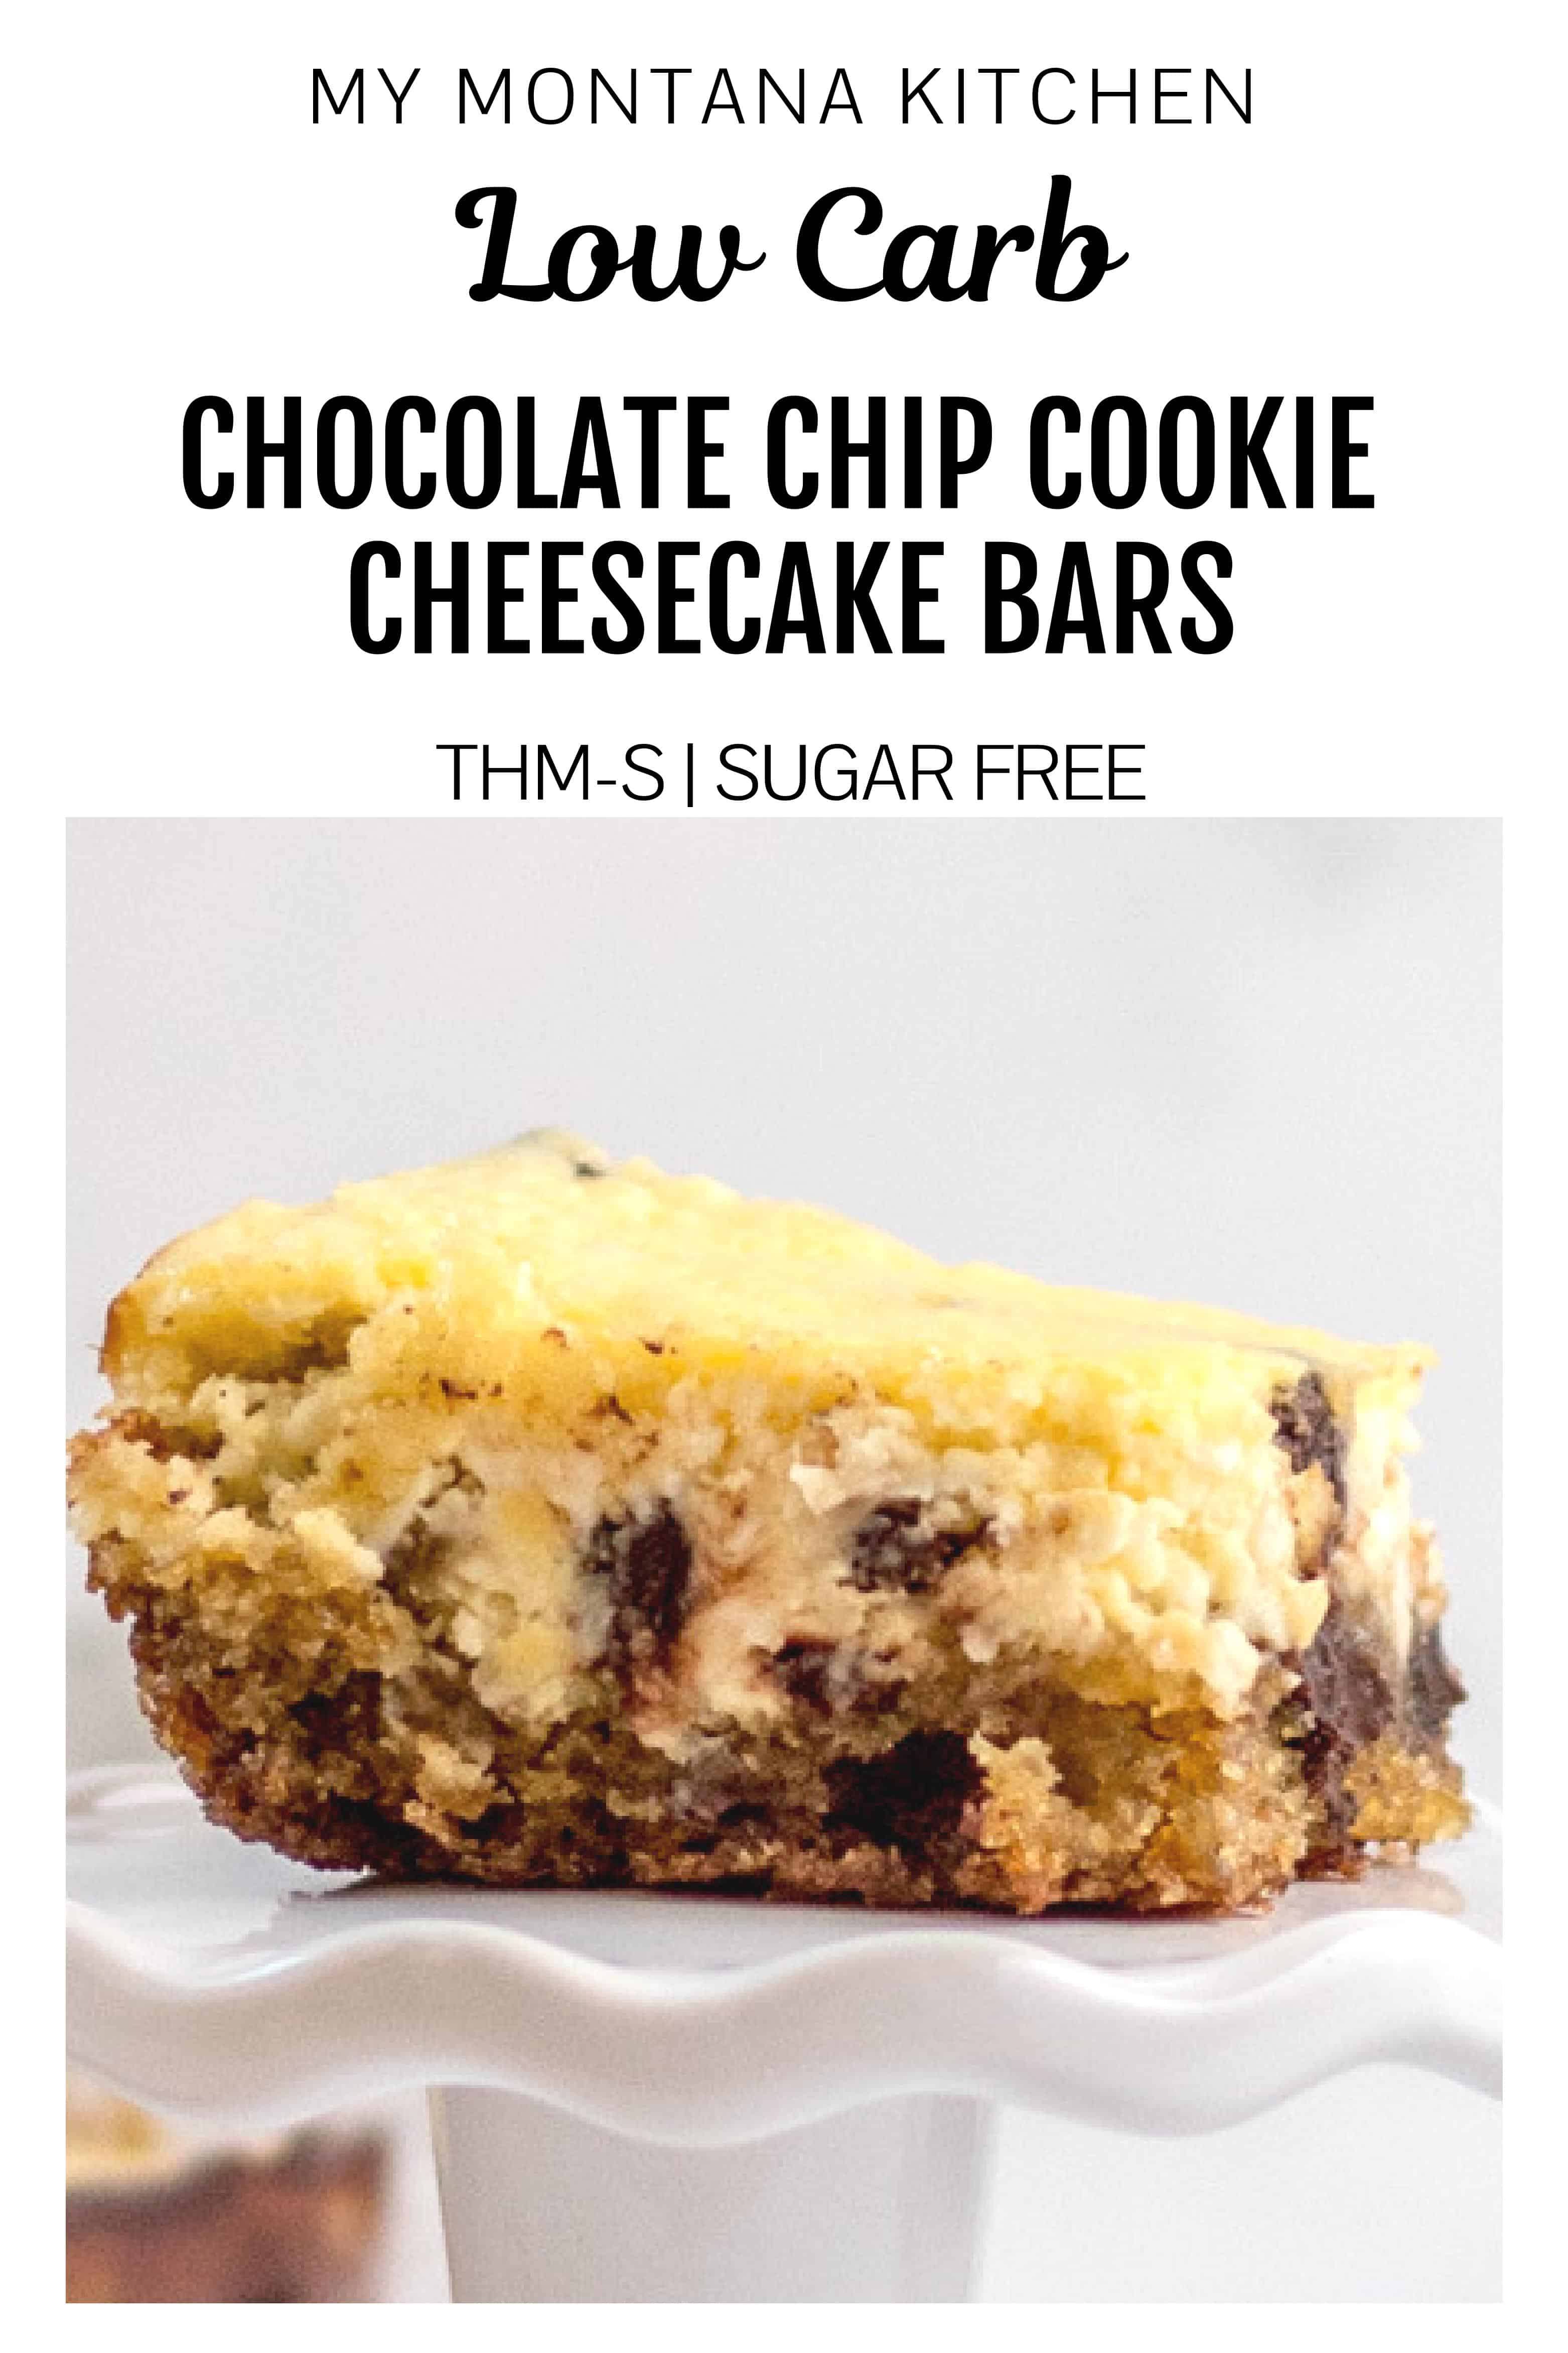 Low Carb Chocolate Chip Cookie Cheesecake bars are a decadent, delicious, low carb dessert that everyone will love! Dense sugar free chocolate chip cookie crust topped with rich, decadent cheesecake! #lowcarbcheesecake #lowcarbchocolatechipcookie